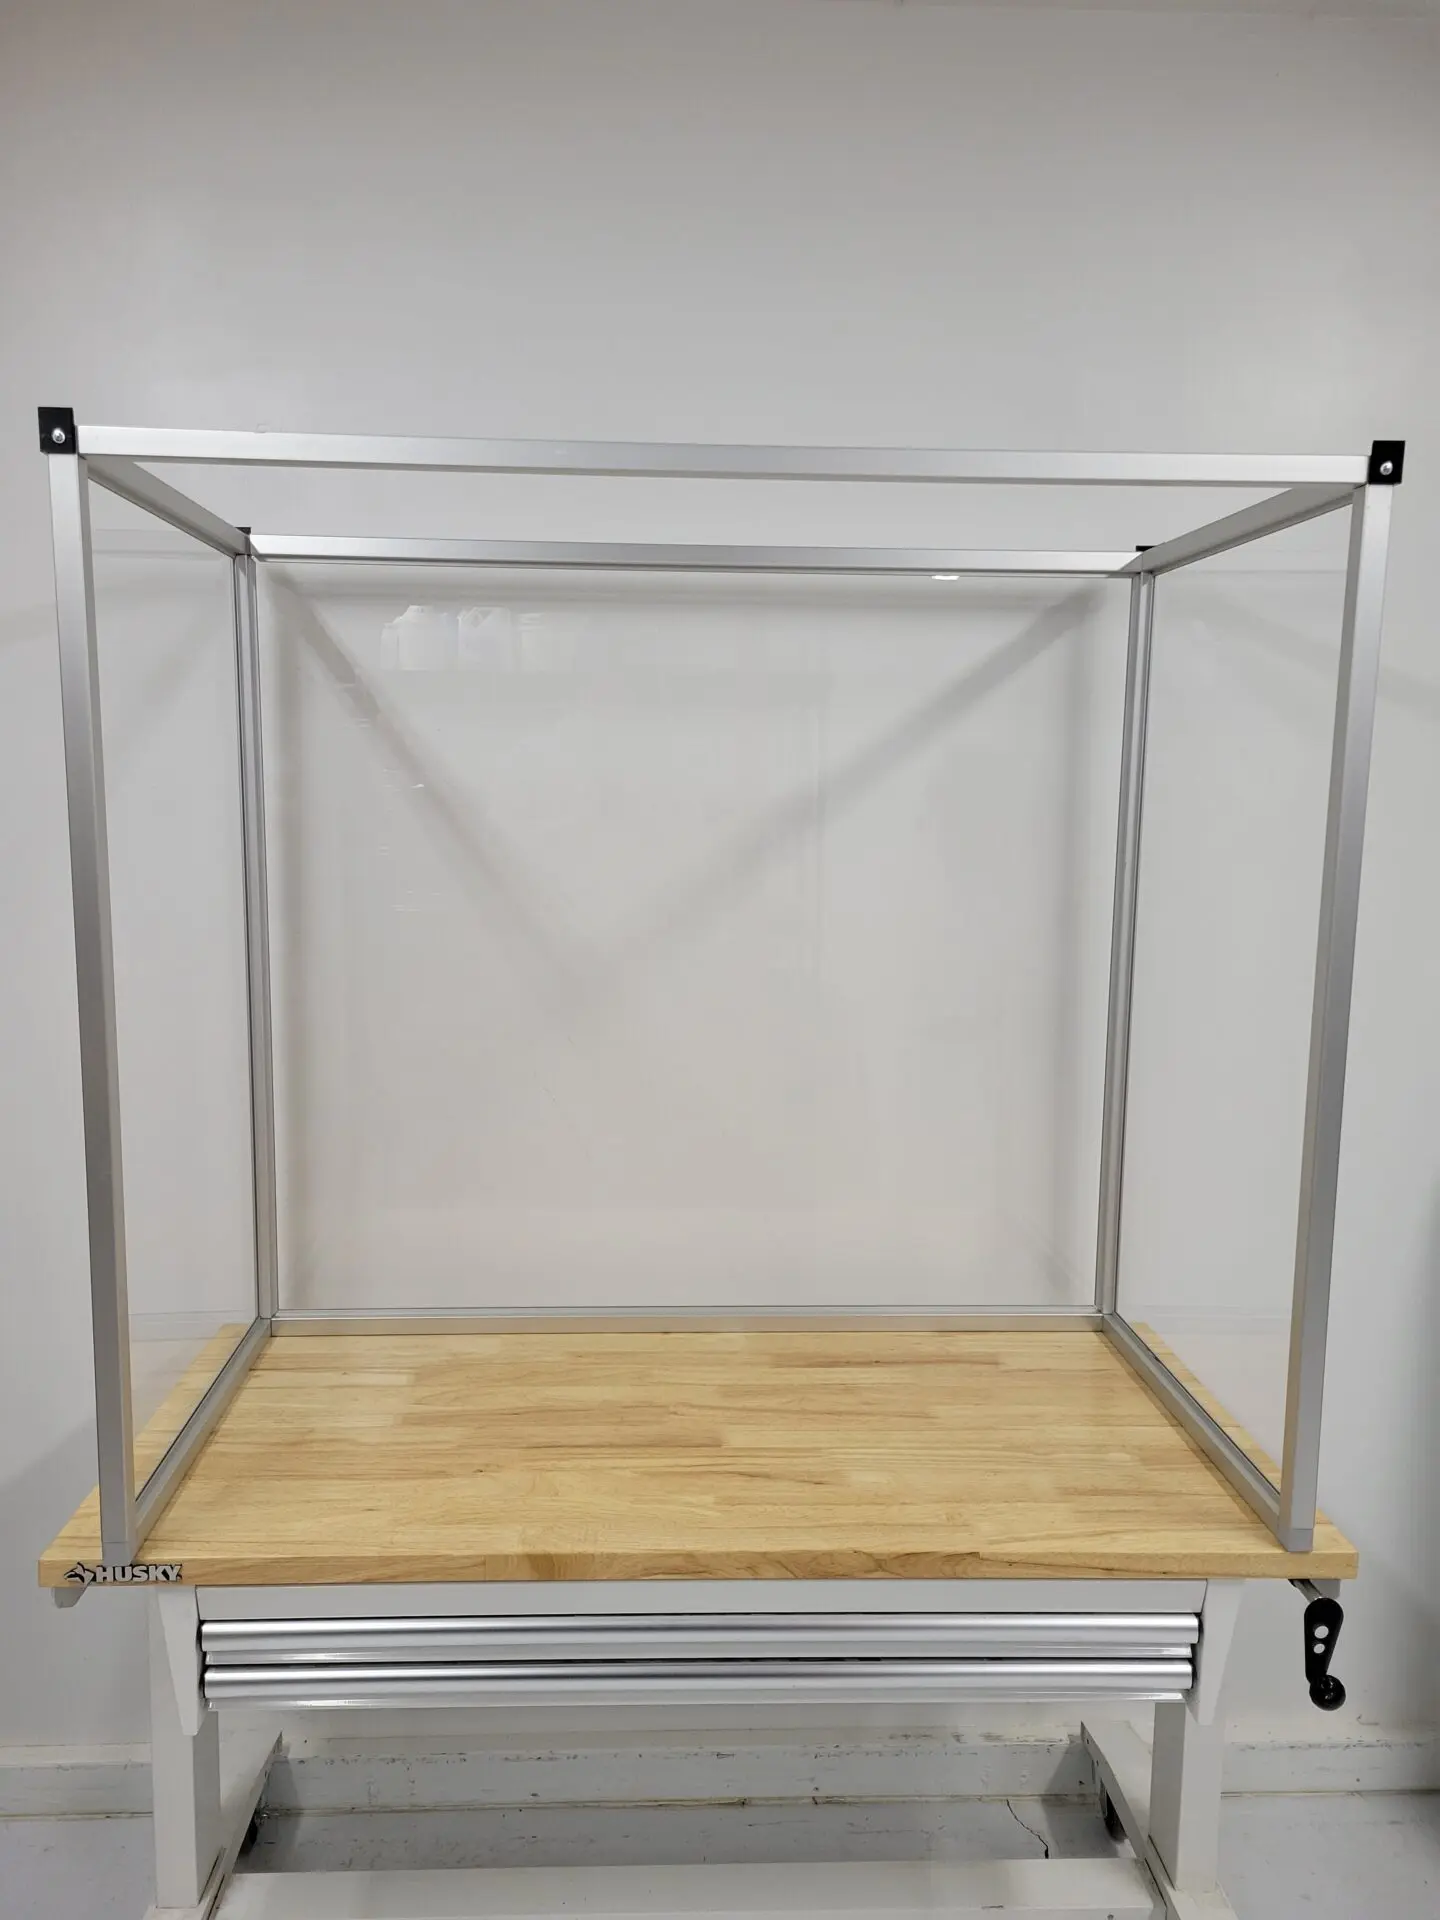 Vertical flow cabinet for 2×4 flowhood